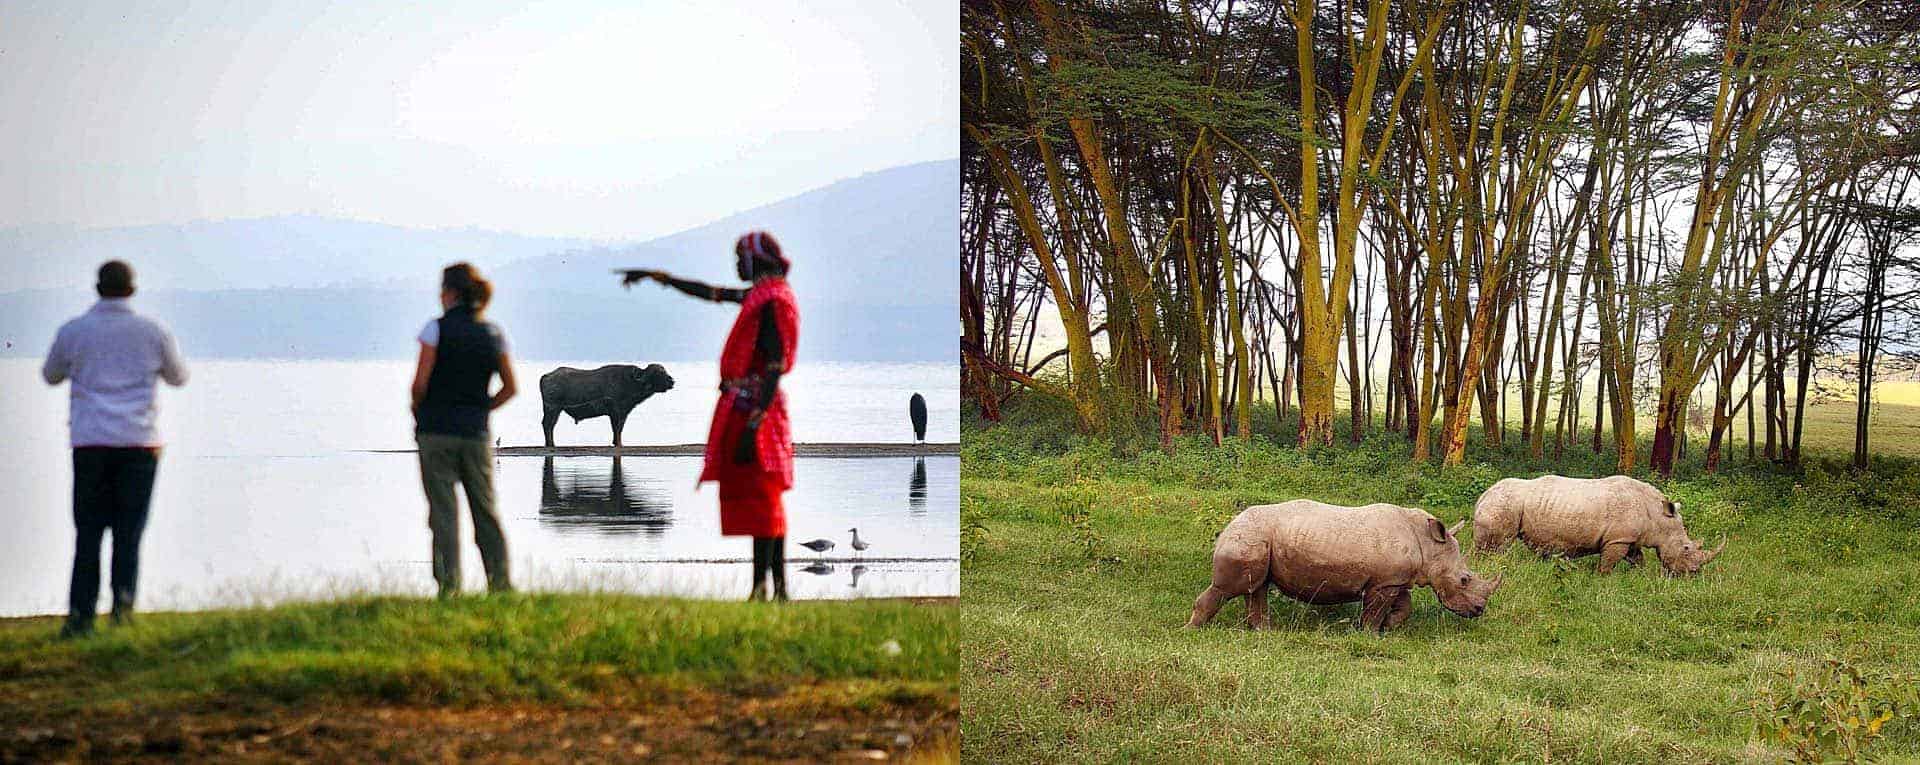 When Is The Best Visiting Time To Go To Lake Nakuru In Kenya - AfricanMecca  Safaris